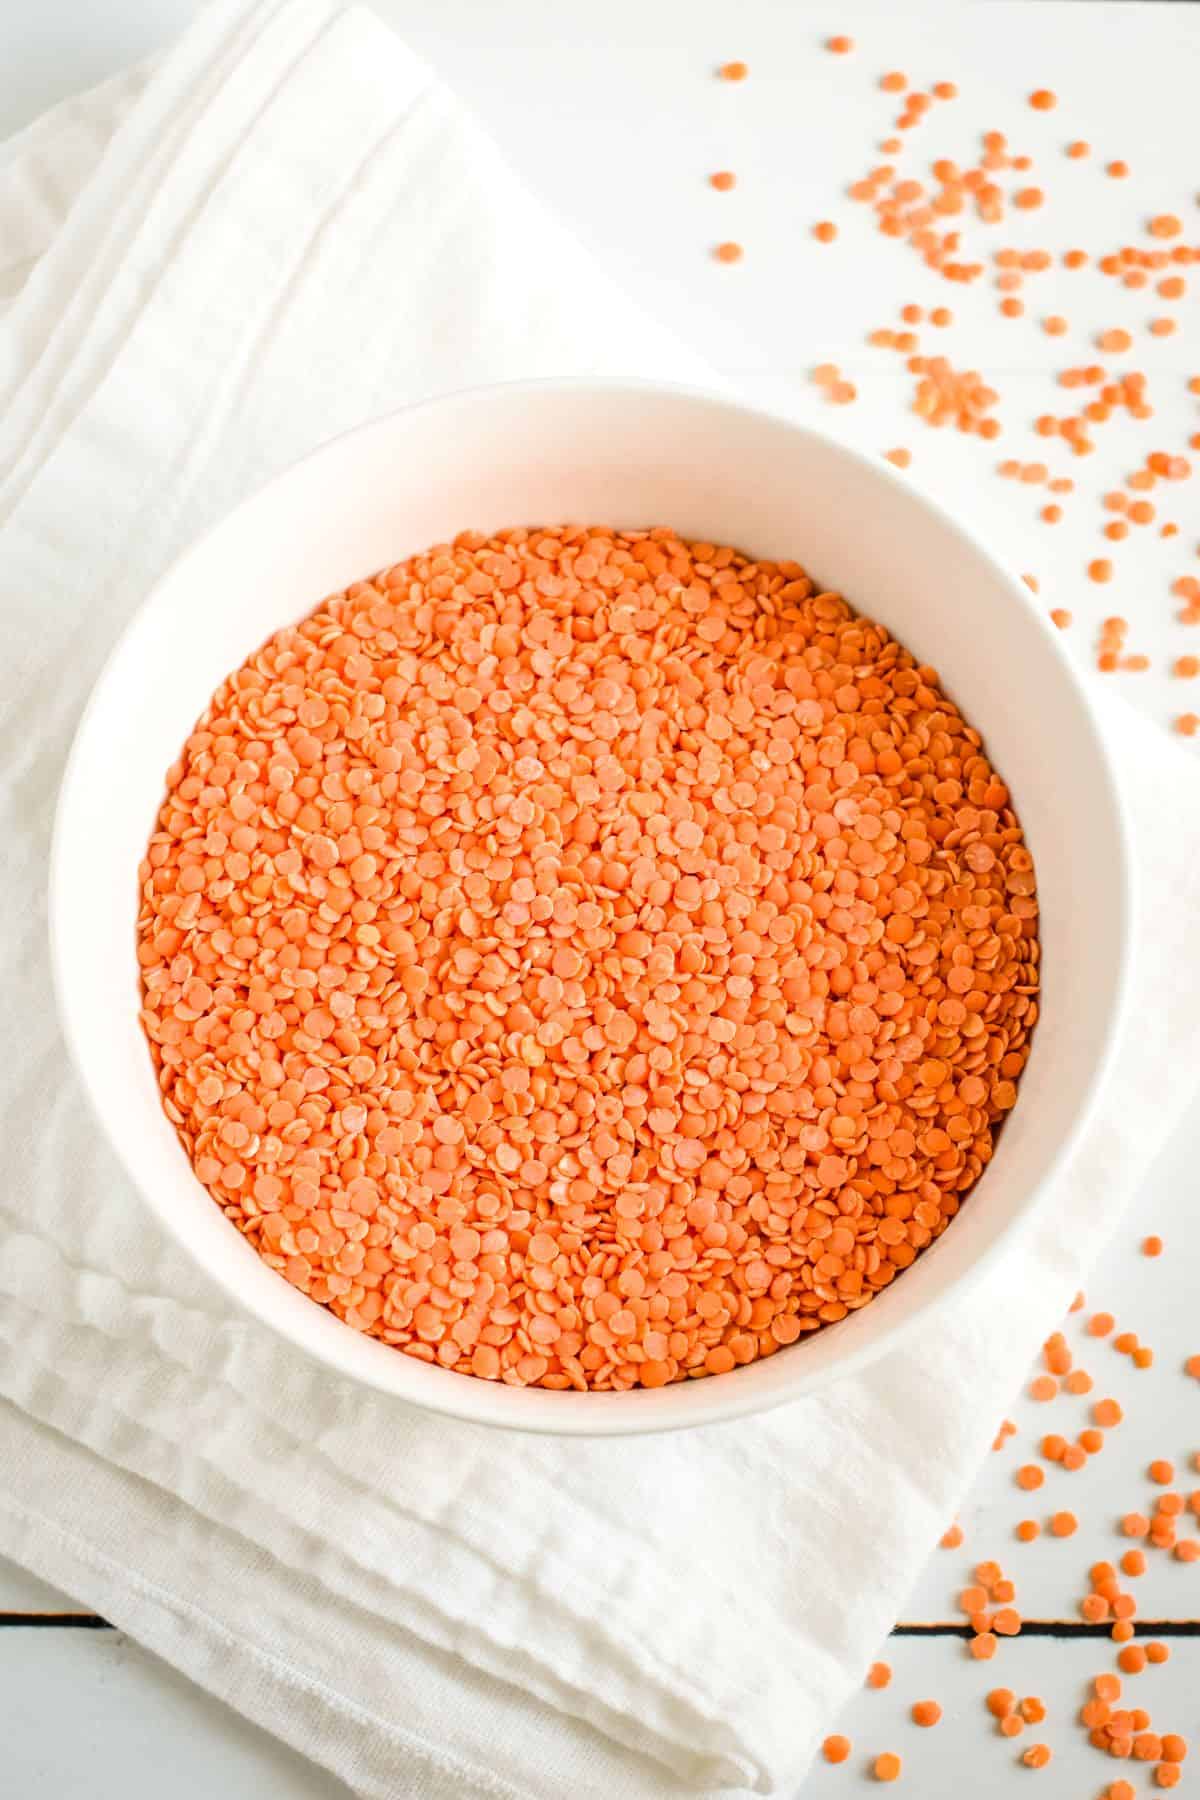 overhead of dry red lentils in a white bowl with some scattered around on the table.